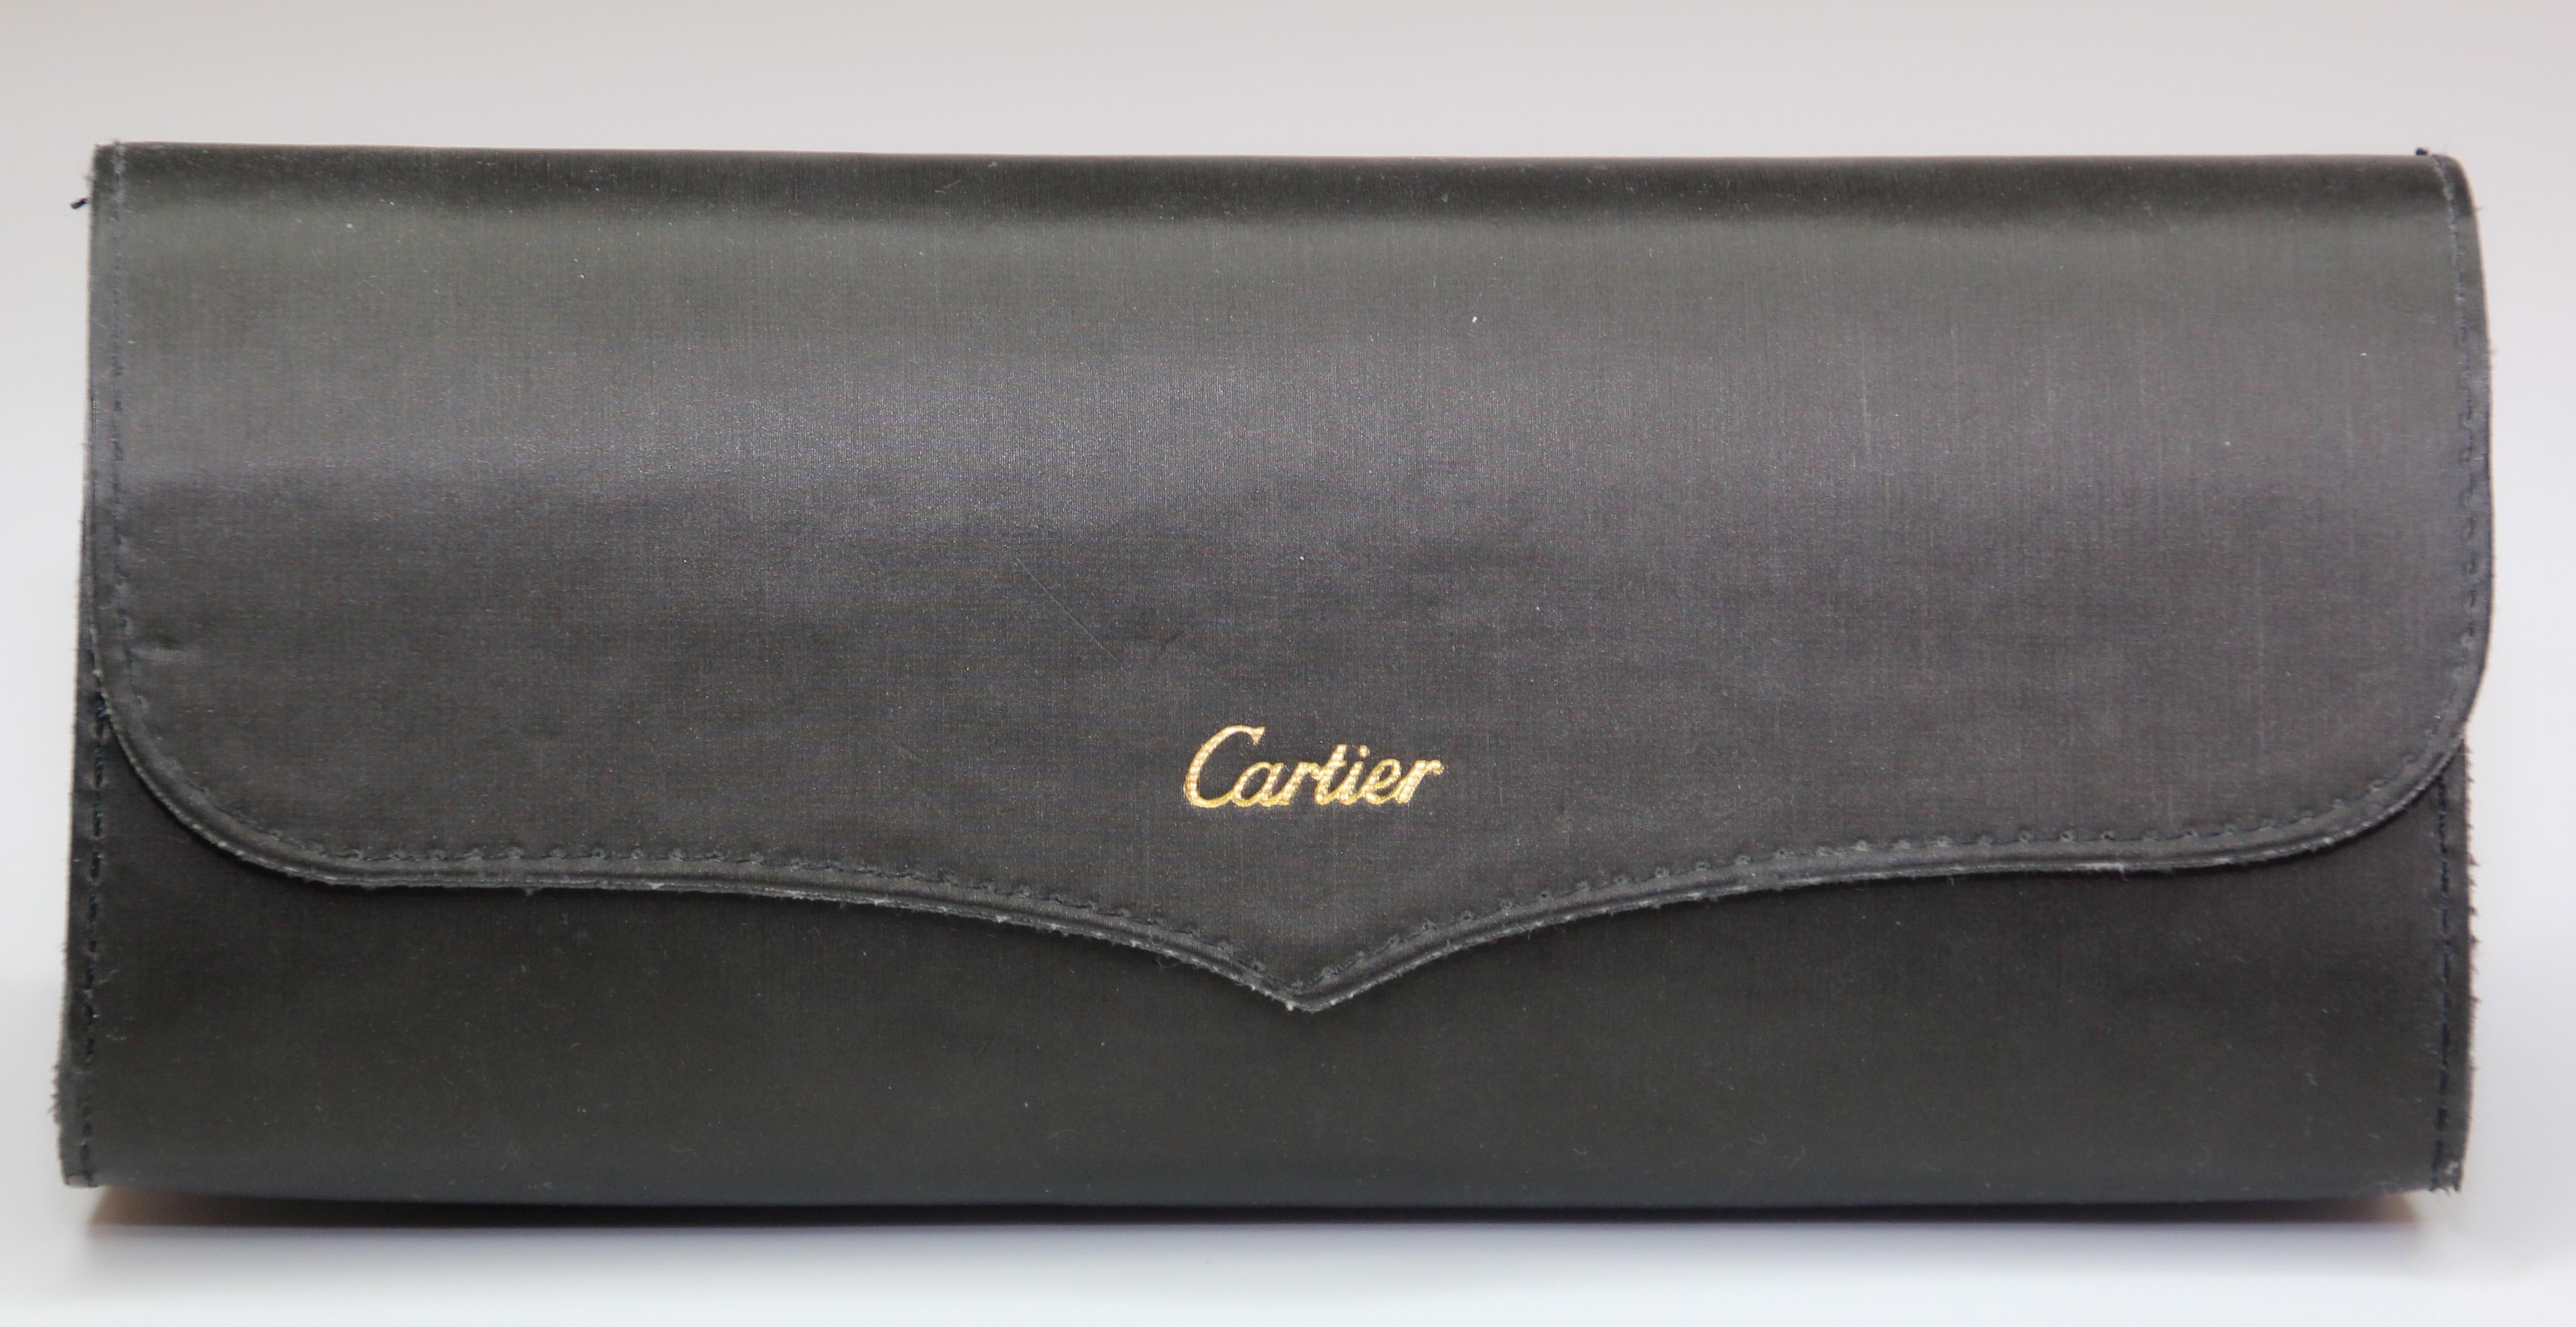 Cartier Vintage Black Sunglasses with Box, 1990 Silver Logo For Sale 4